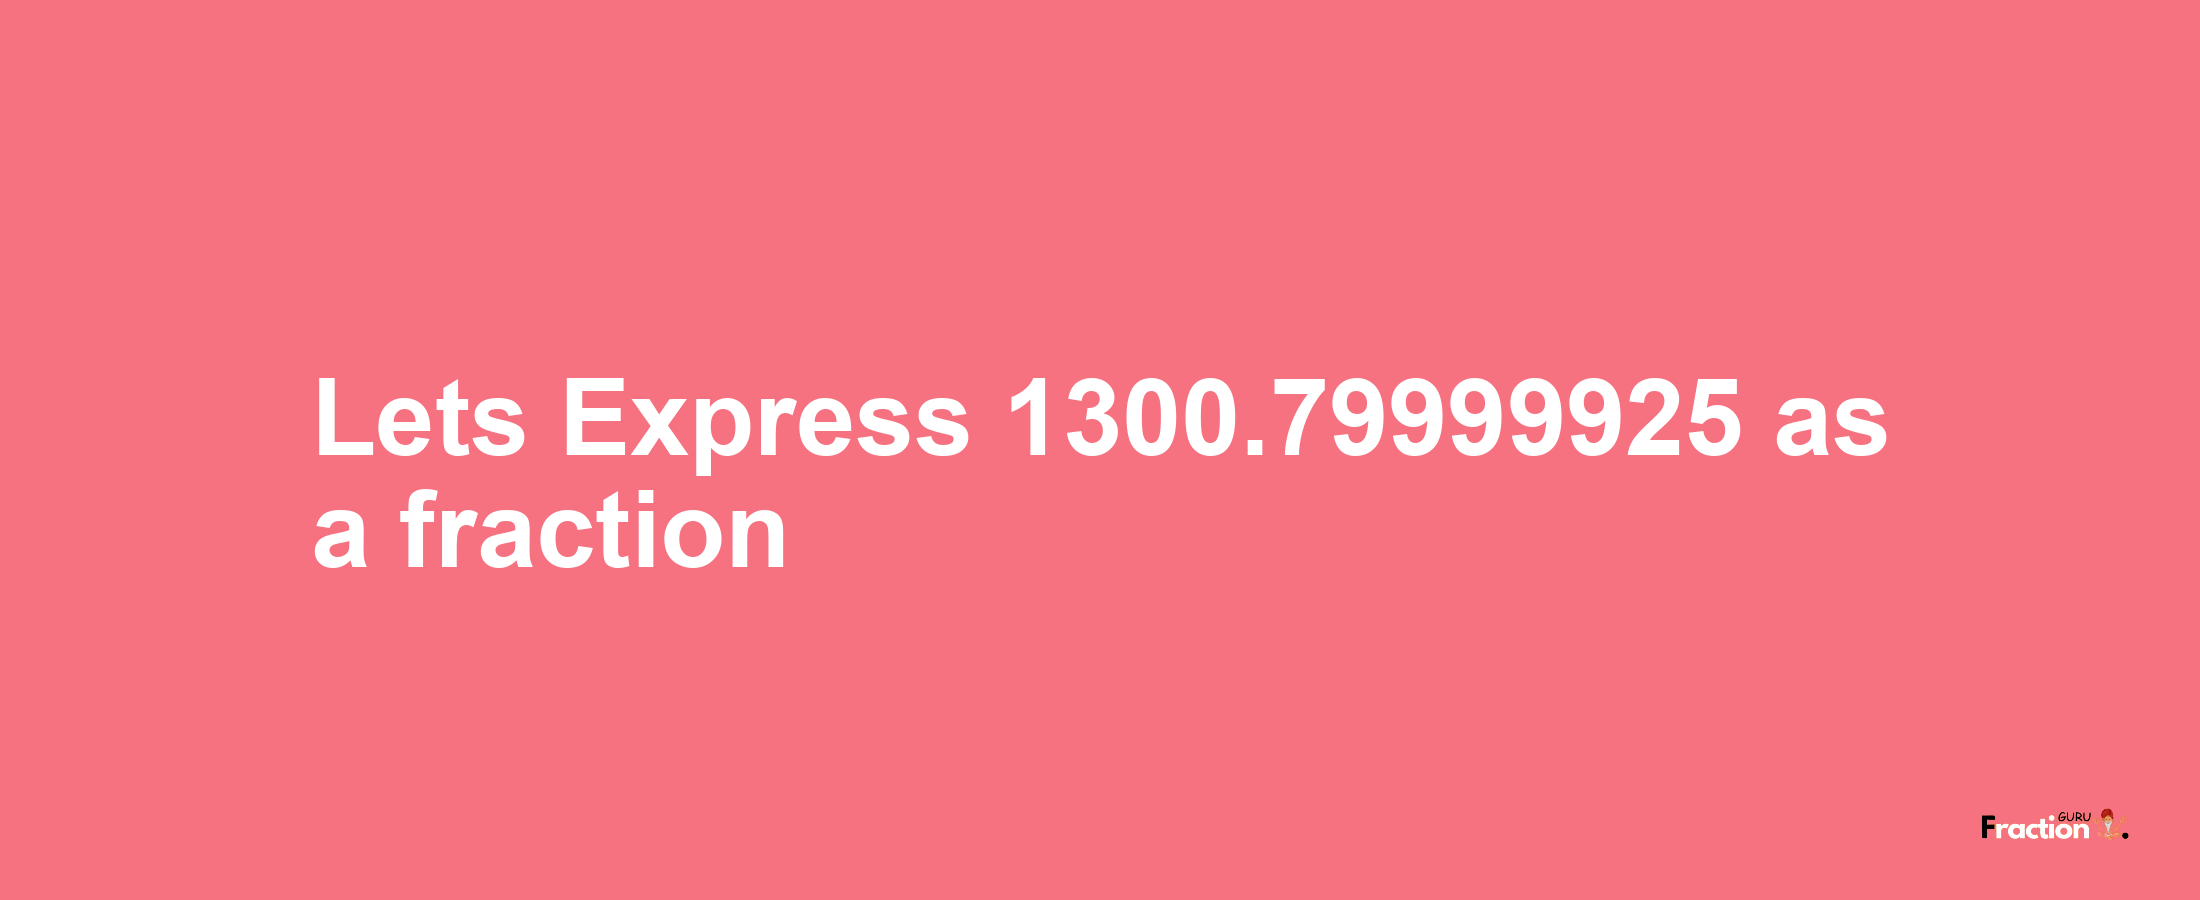 Lets Express 1300.79999925 as afraction